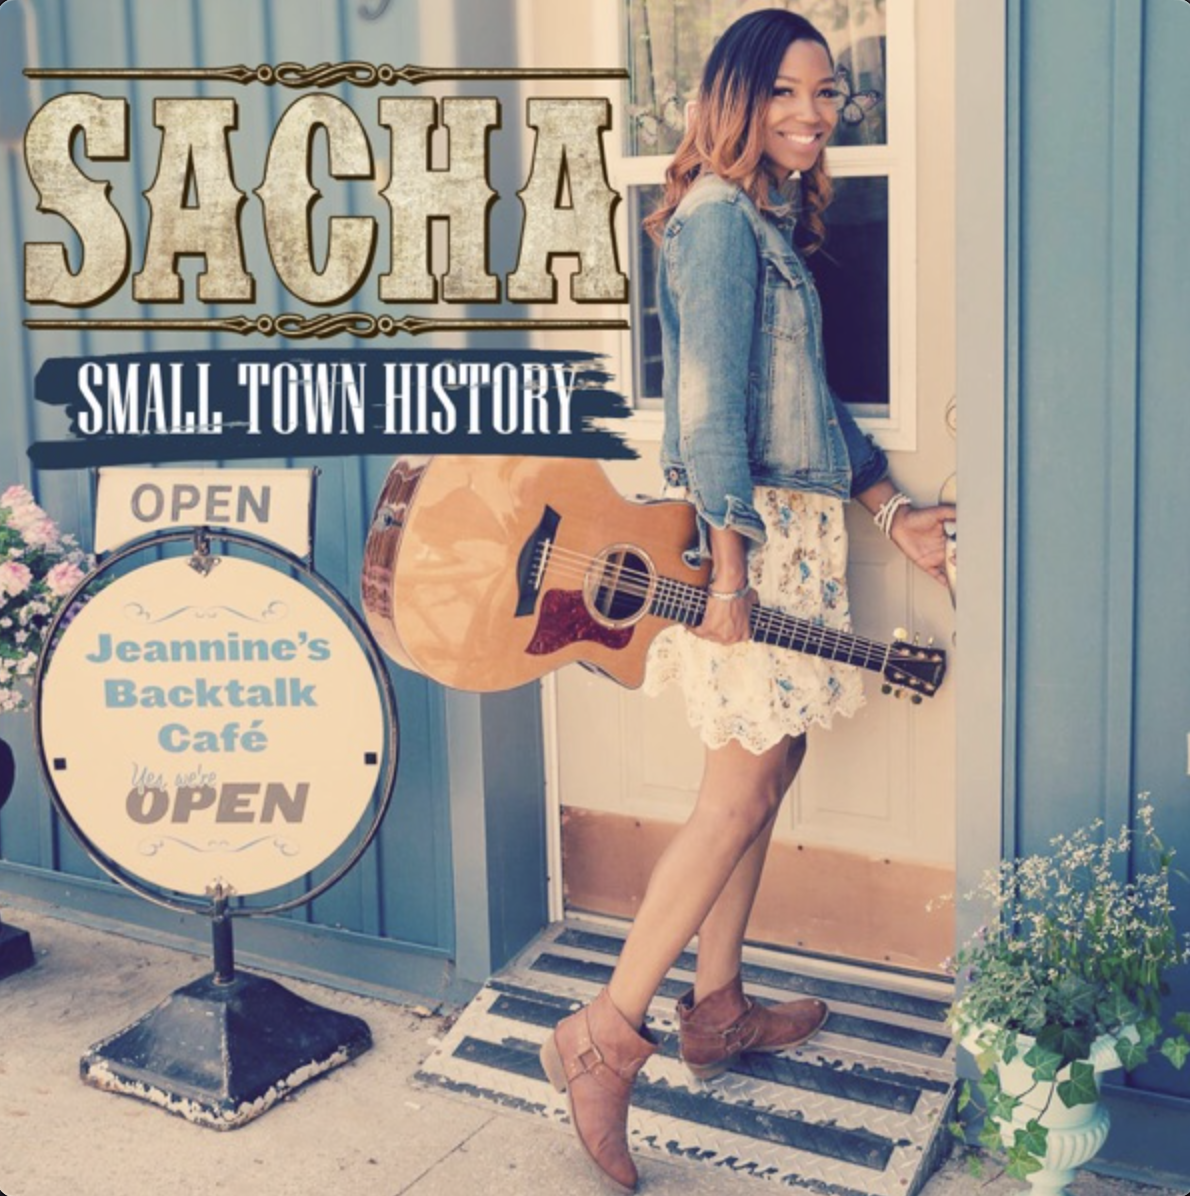 Art for Small Town History by Sacha